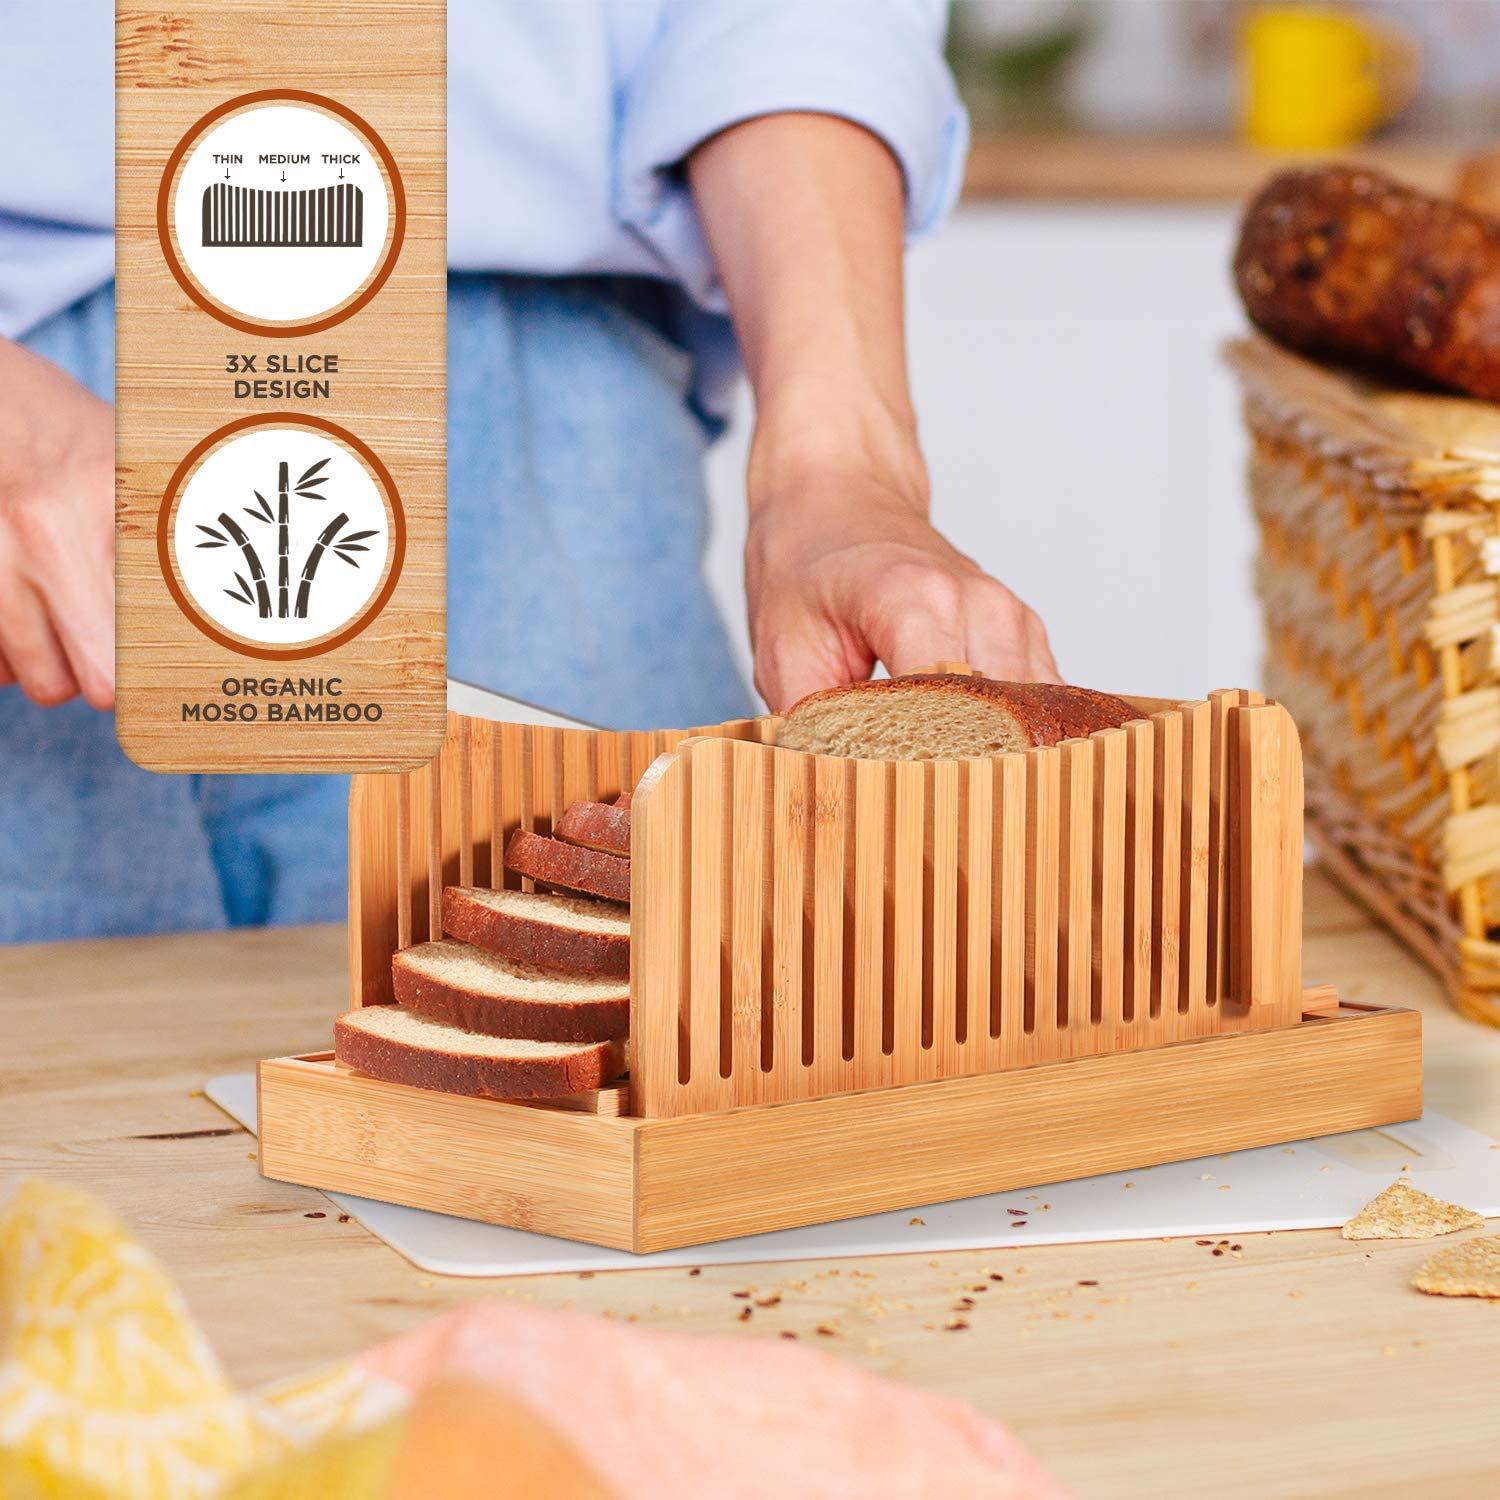 https://www.wideopencountry.com/wp-content/uploads/sites/4/eats/2021/05/Premium-Bamboo-Bread-Slicer-with-Knife-Cutting-Guide-for-Homemade-Bread-Cakes-Bagels-Foldable-and-Compact-with-Crumb-Tray-and-Stainless-Steel-Knife.jpg?resize=1500%2C1500